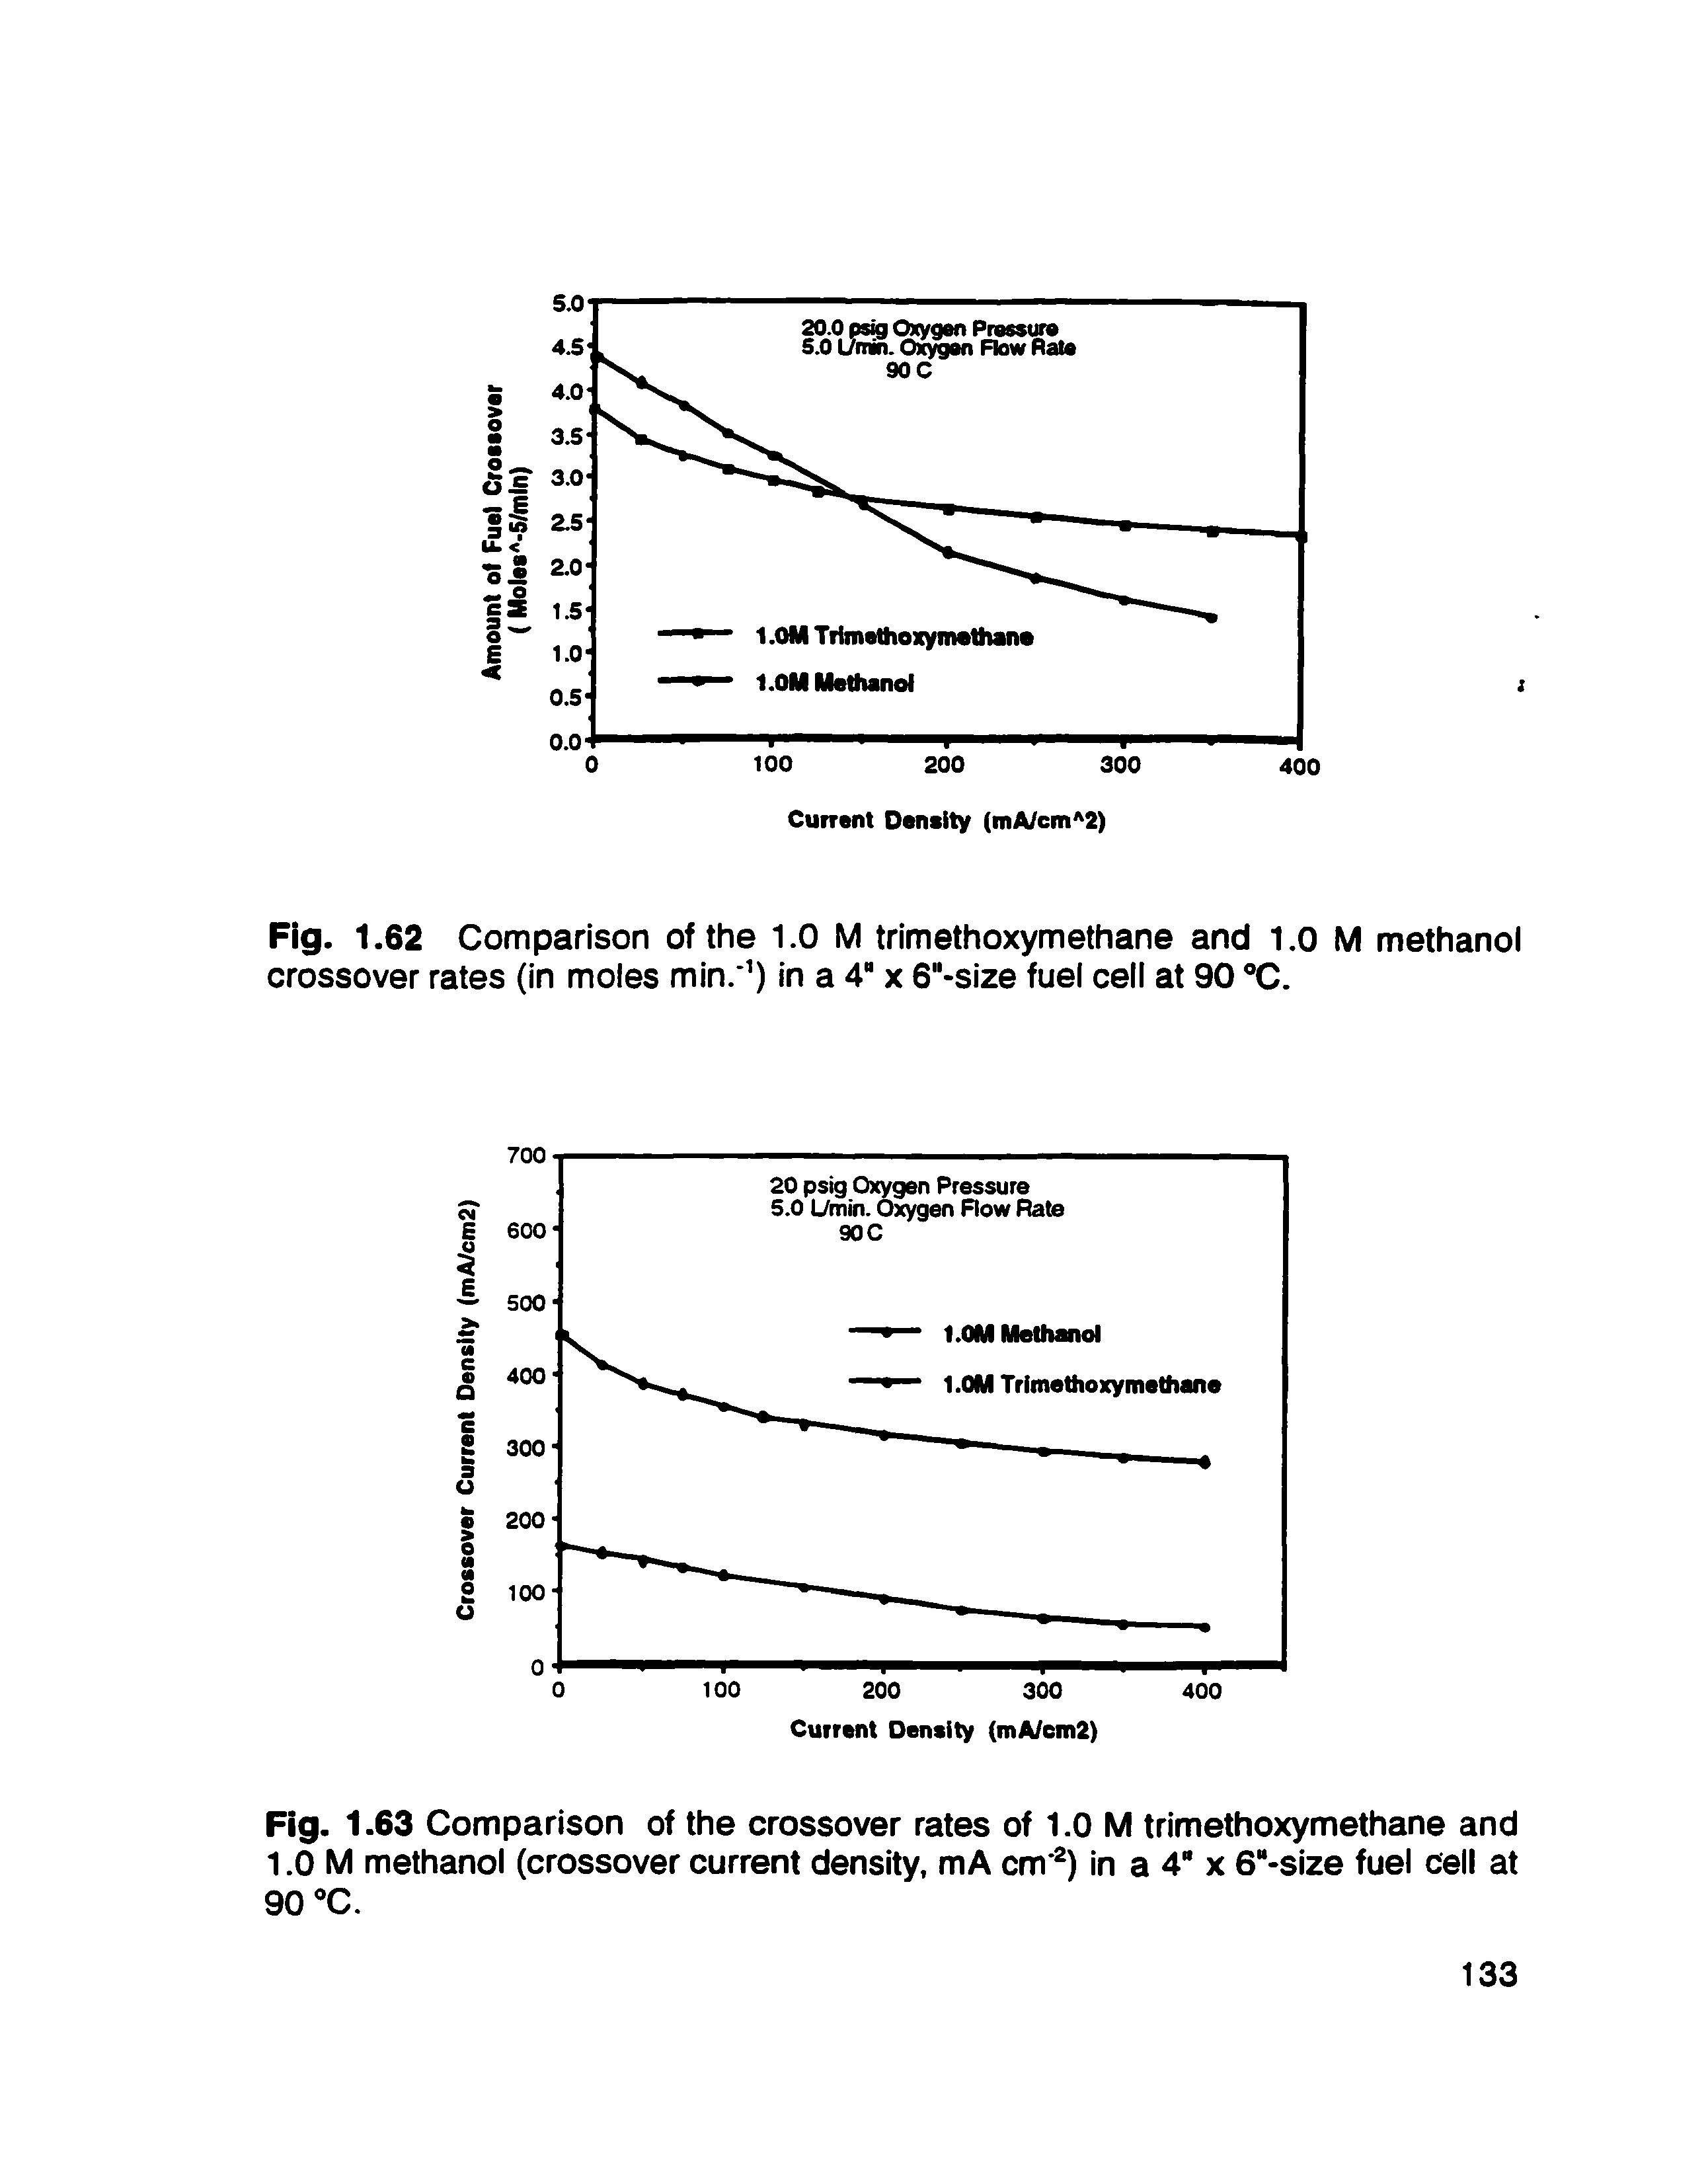 Fig. 1.63 Comparison of the crossover rates of 1.0 M trimethoxymethane and 1.0 M methanol (crossover current density, mA cm ) in a 4" x 6 size fuel cell at 90 C.